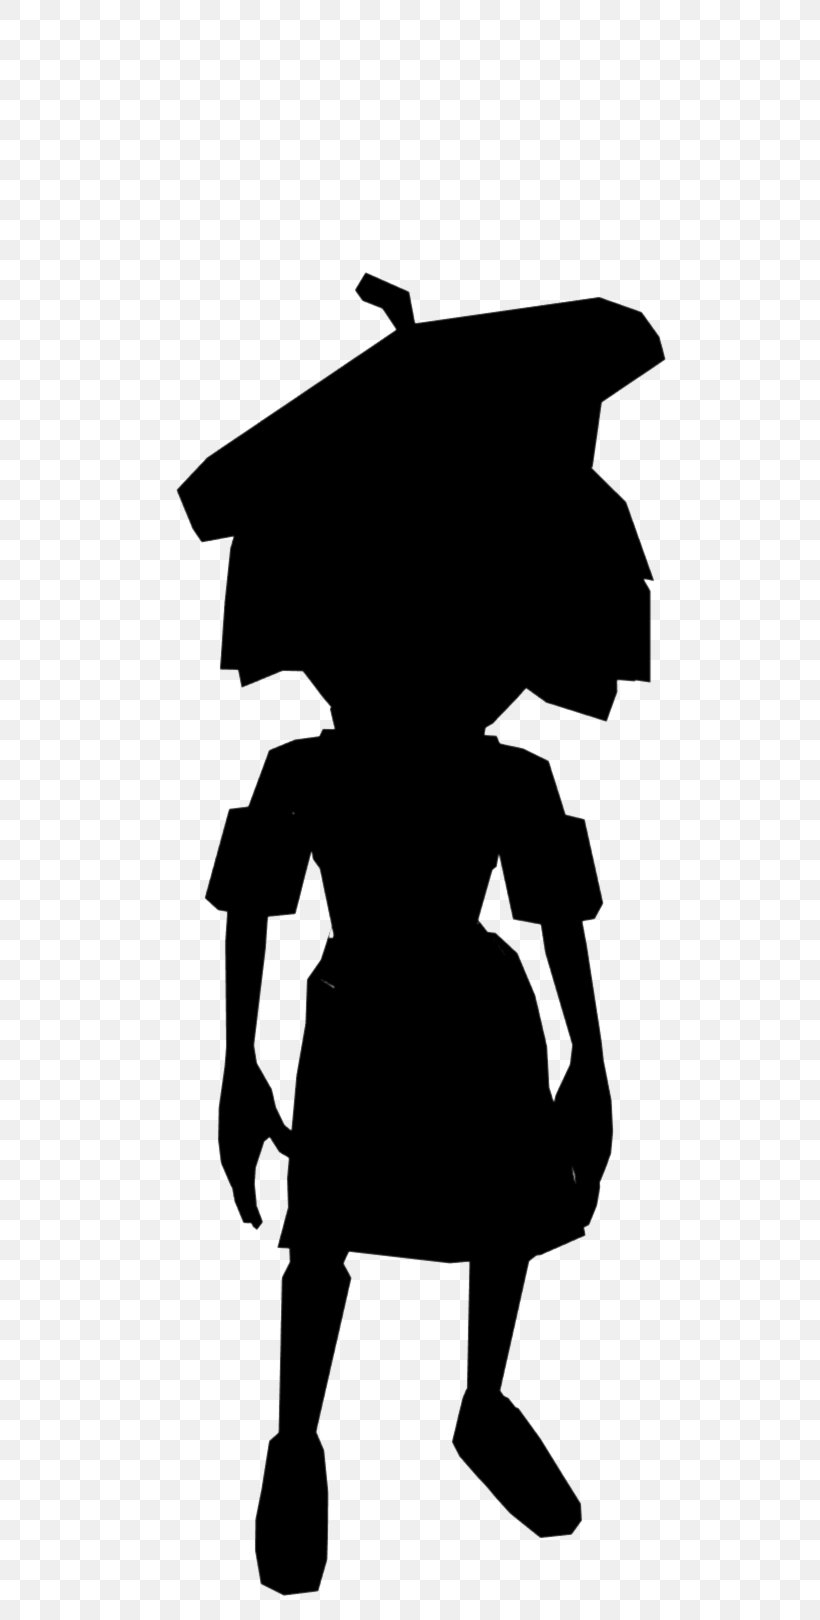 Clip Art Character Silhouette Fiction Black M, PNG, 676x1620px, Character, Black M, Blackandwhite, Fiction, Silhouette Download Free